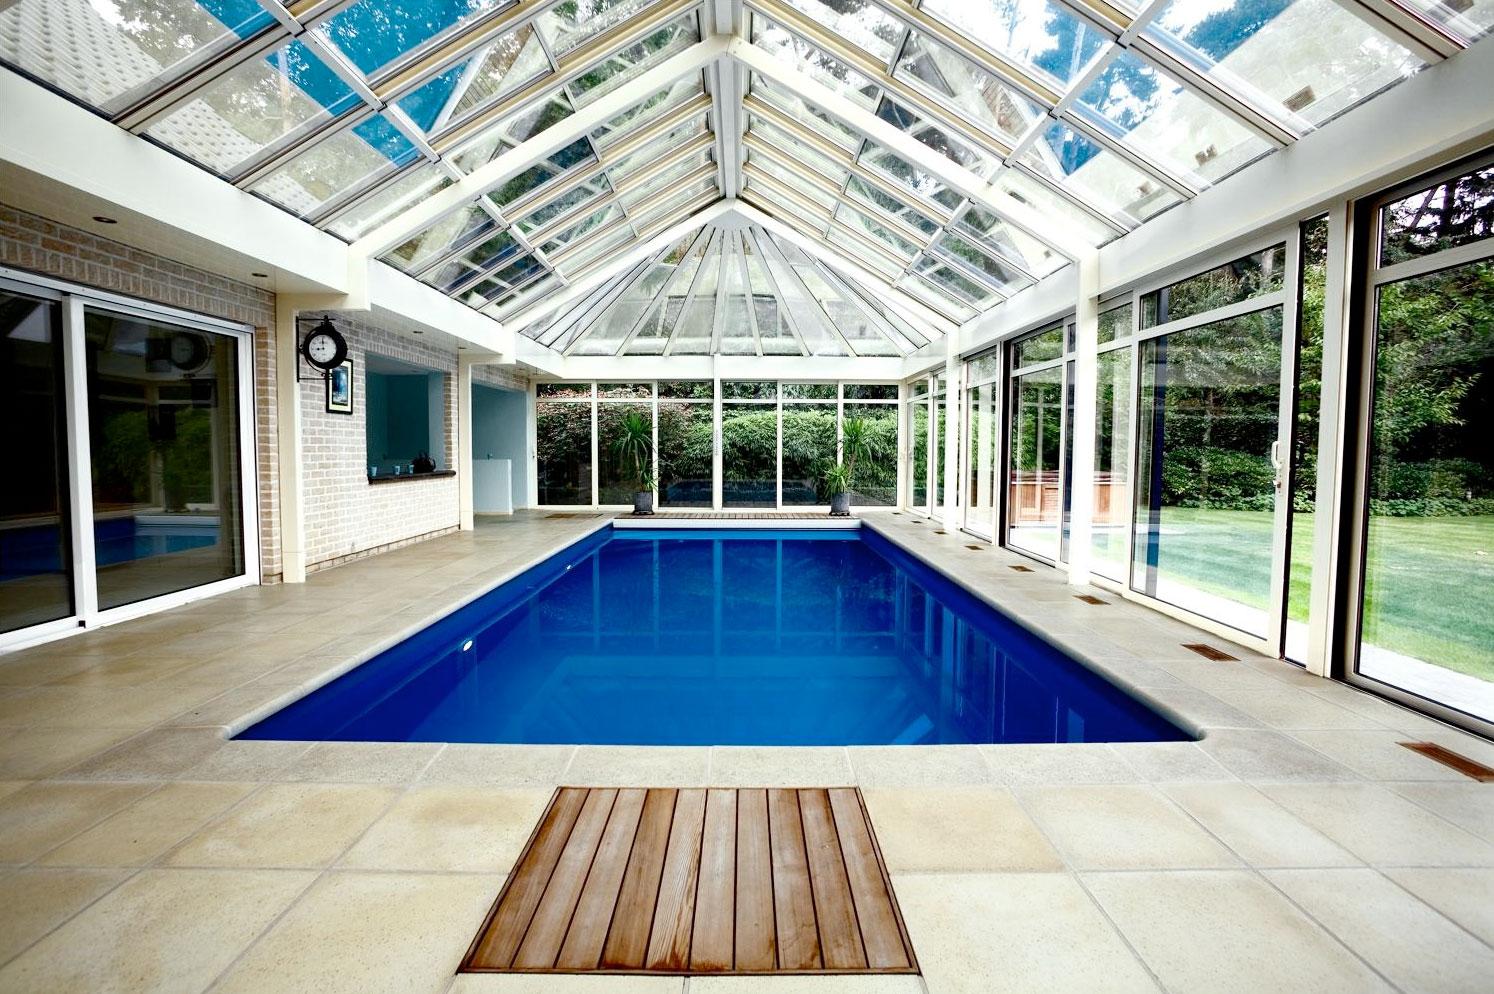 Indoor Swimming Pool Ideas For Your Home – The WoW Style